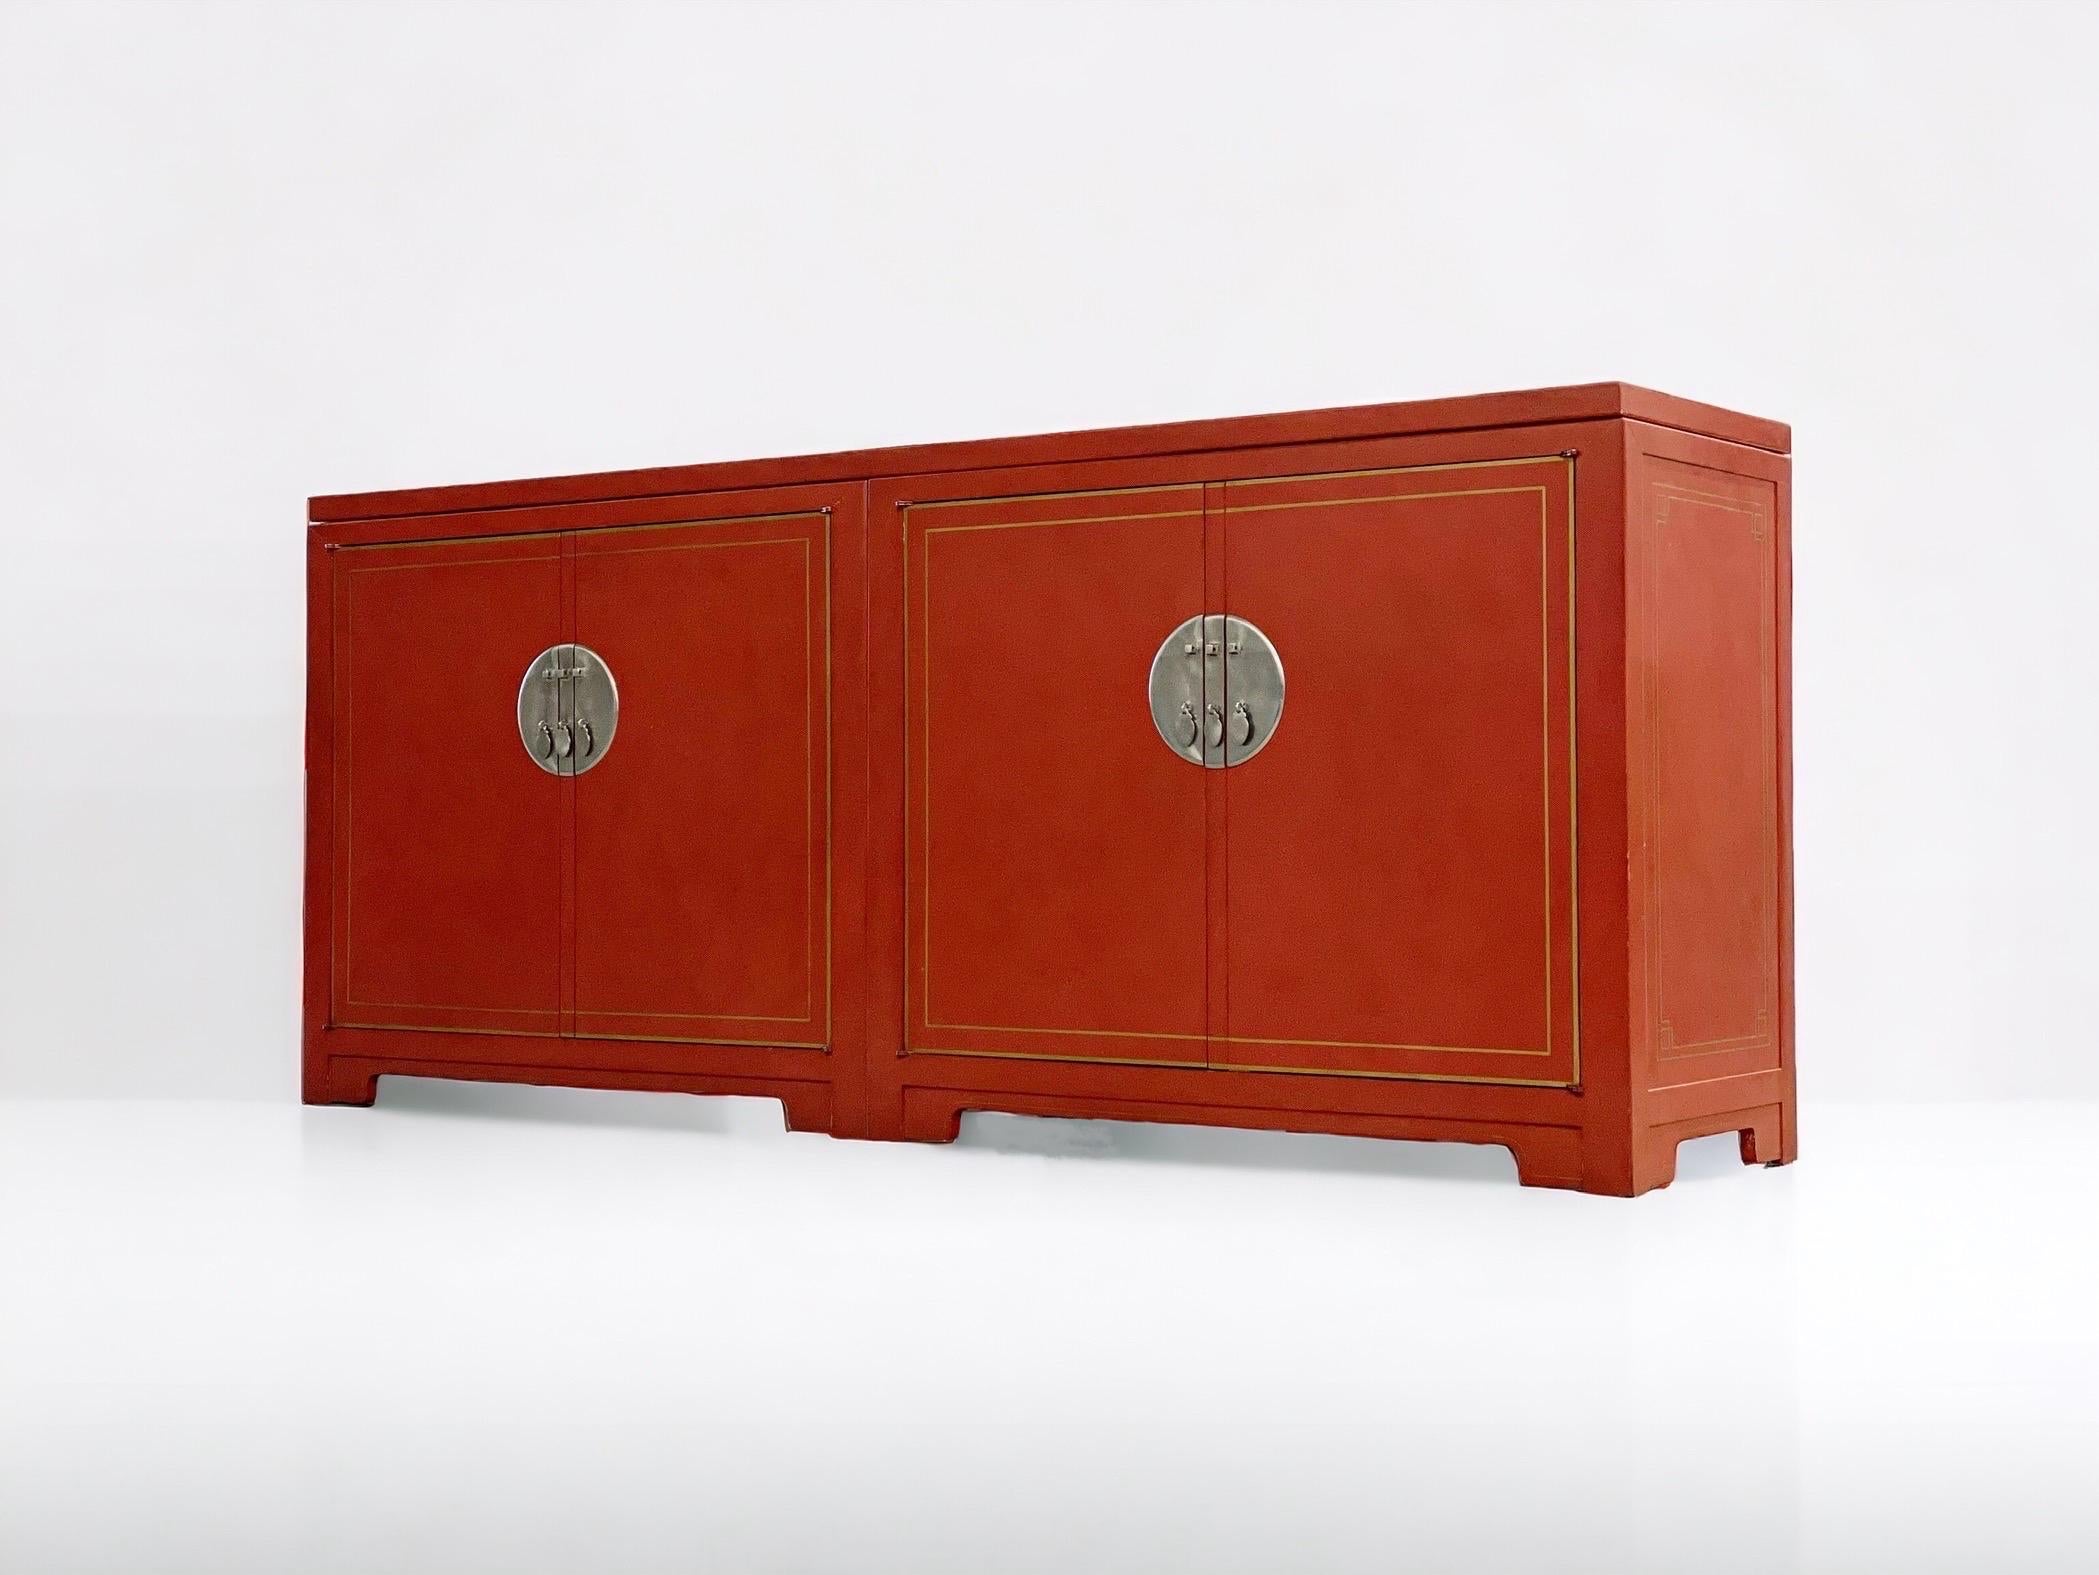 Exquisite credenza sideboard by Michael Taylor for Baker Furniture, circa early 1950s. Part of his iconic 